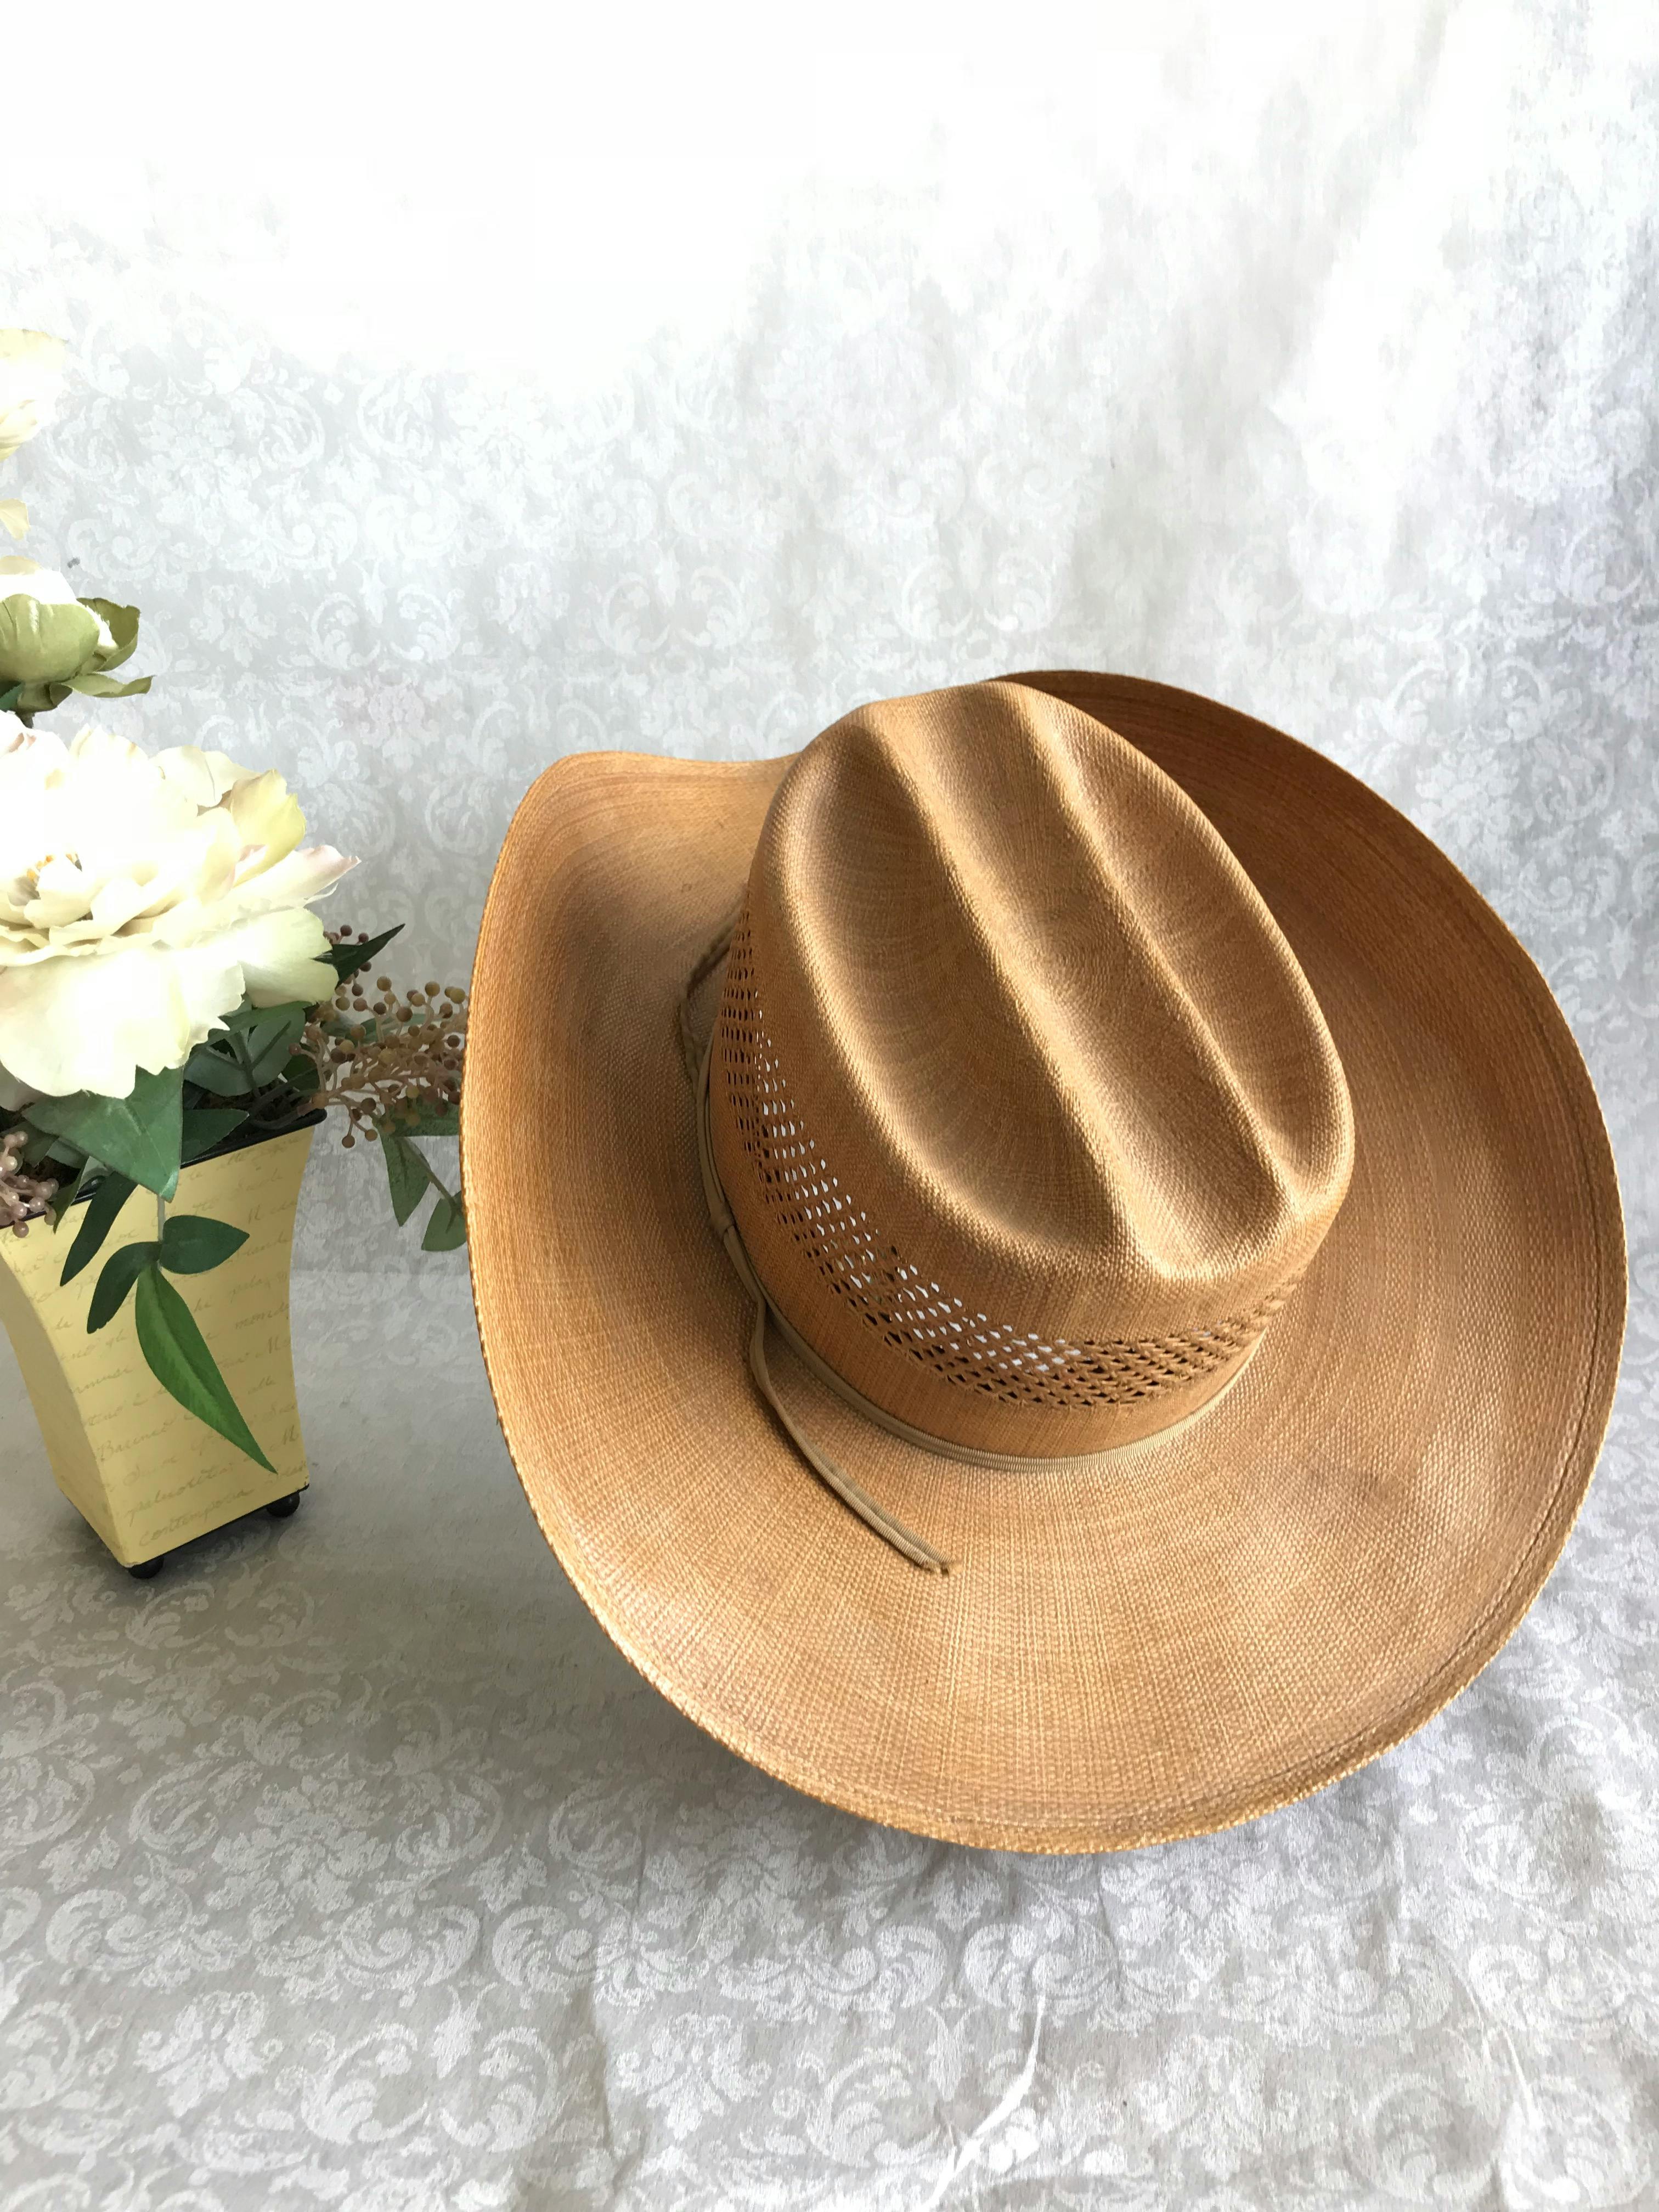 Free stock photo of artificial flowers, cowboy hat, flowers